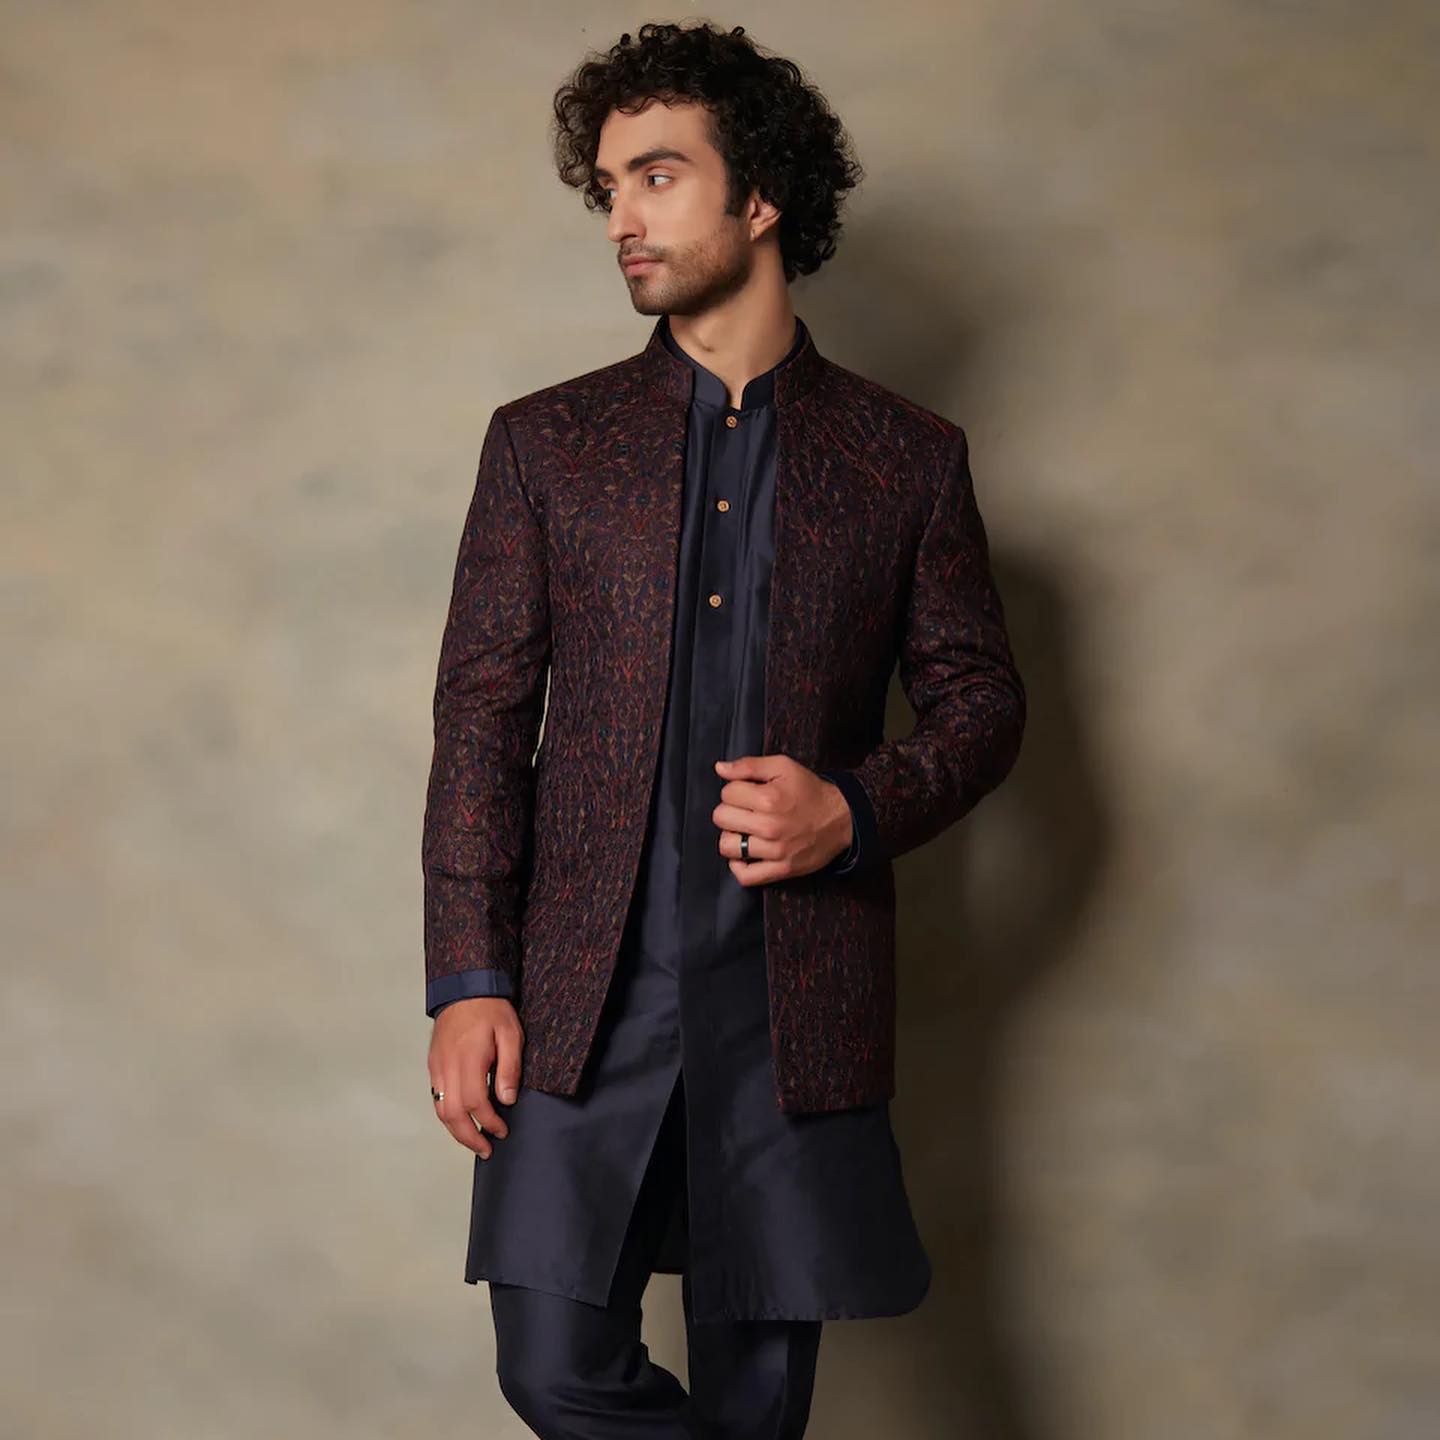 Cool Wedding Guest Outfit Ideas for Men to Look Dapper Every Bit